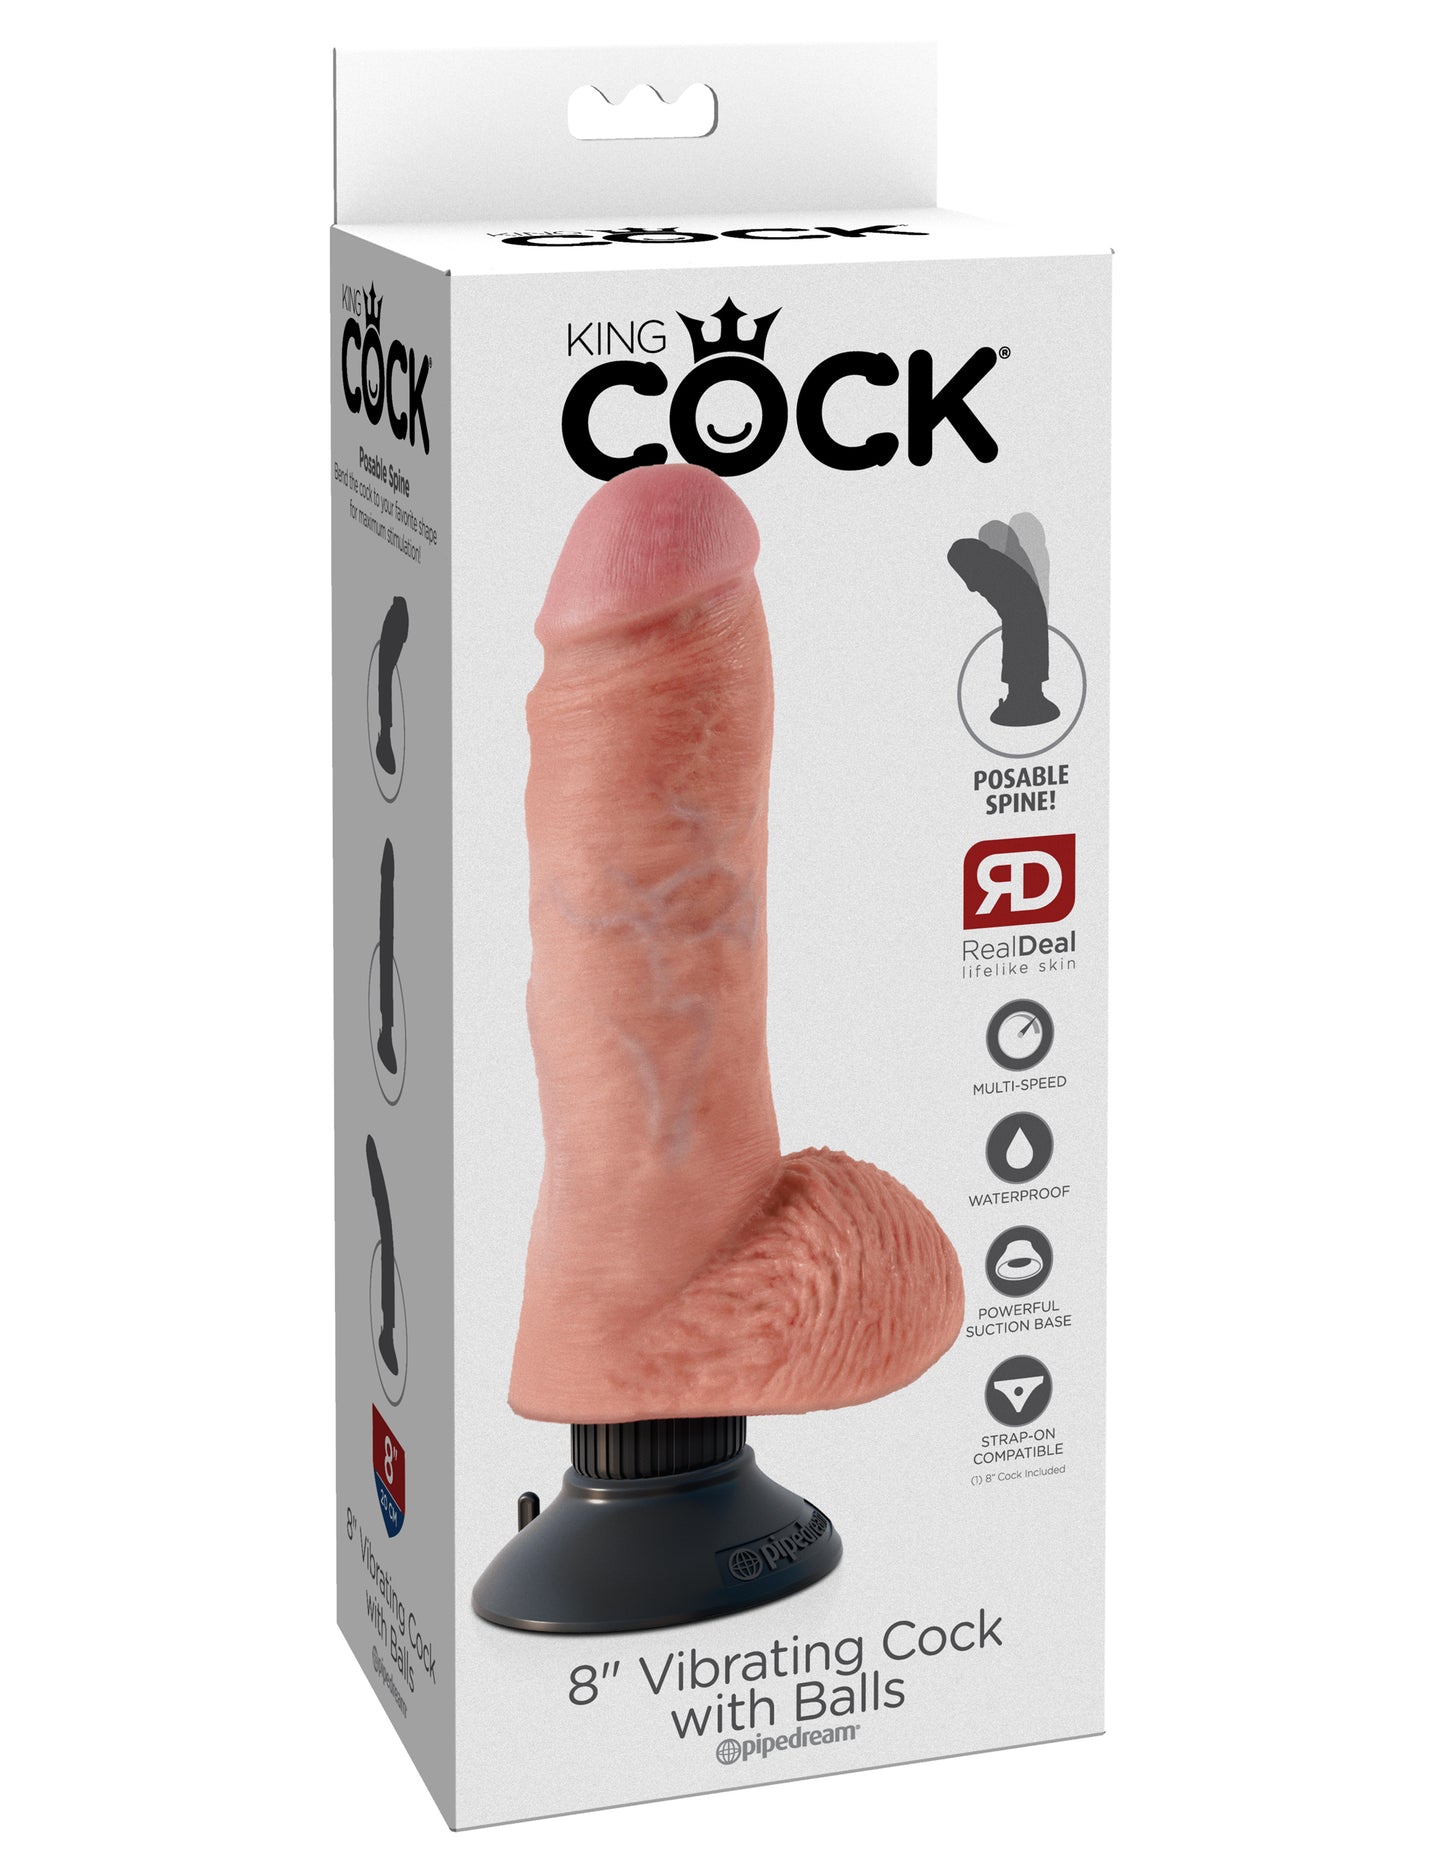 King Cock 8-Inch Vibrating Cock With Balls - Flesh PD5407-21